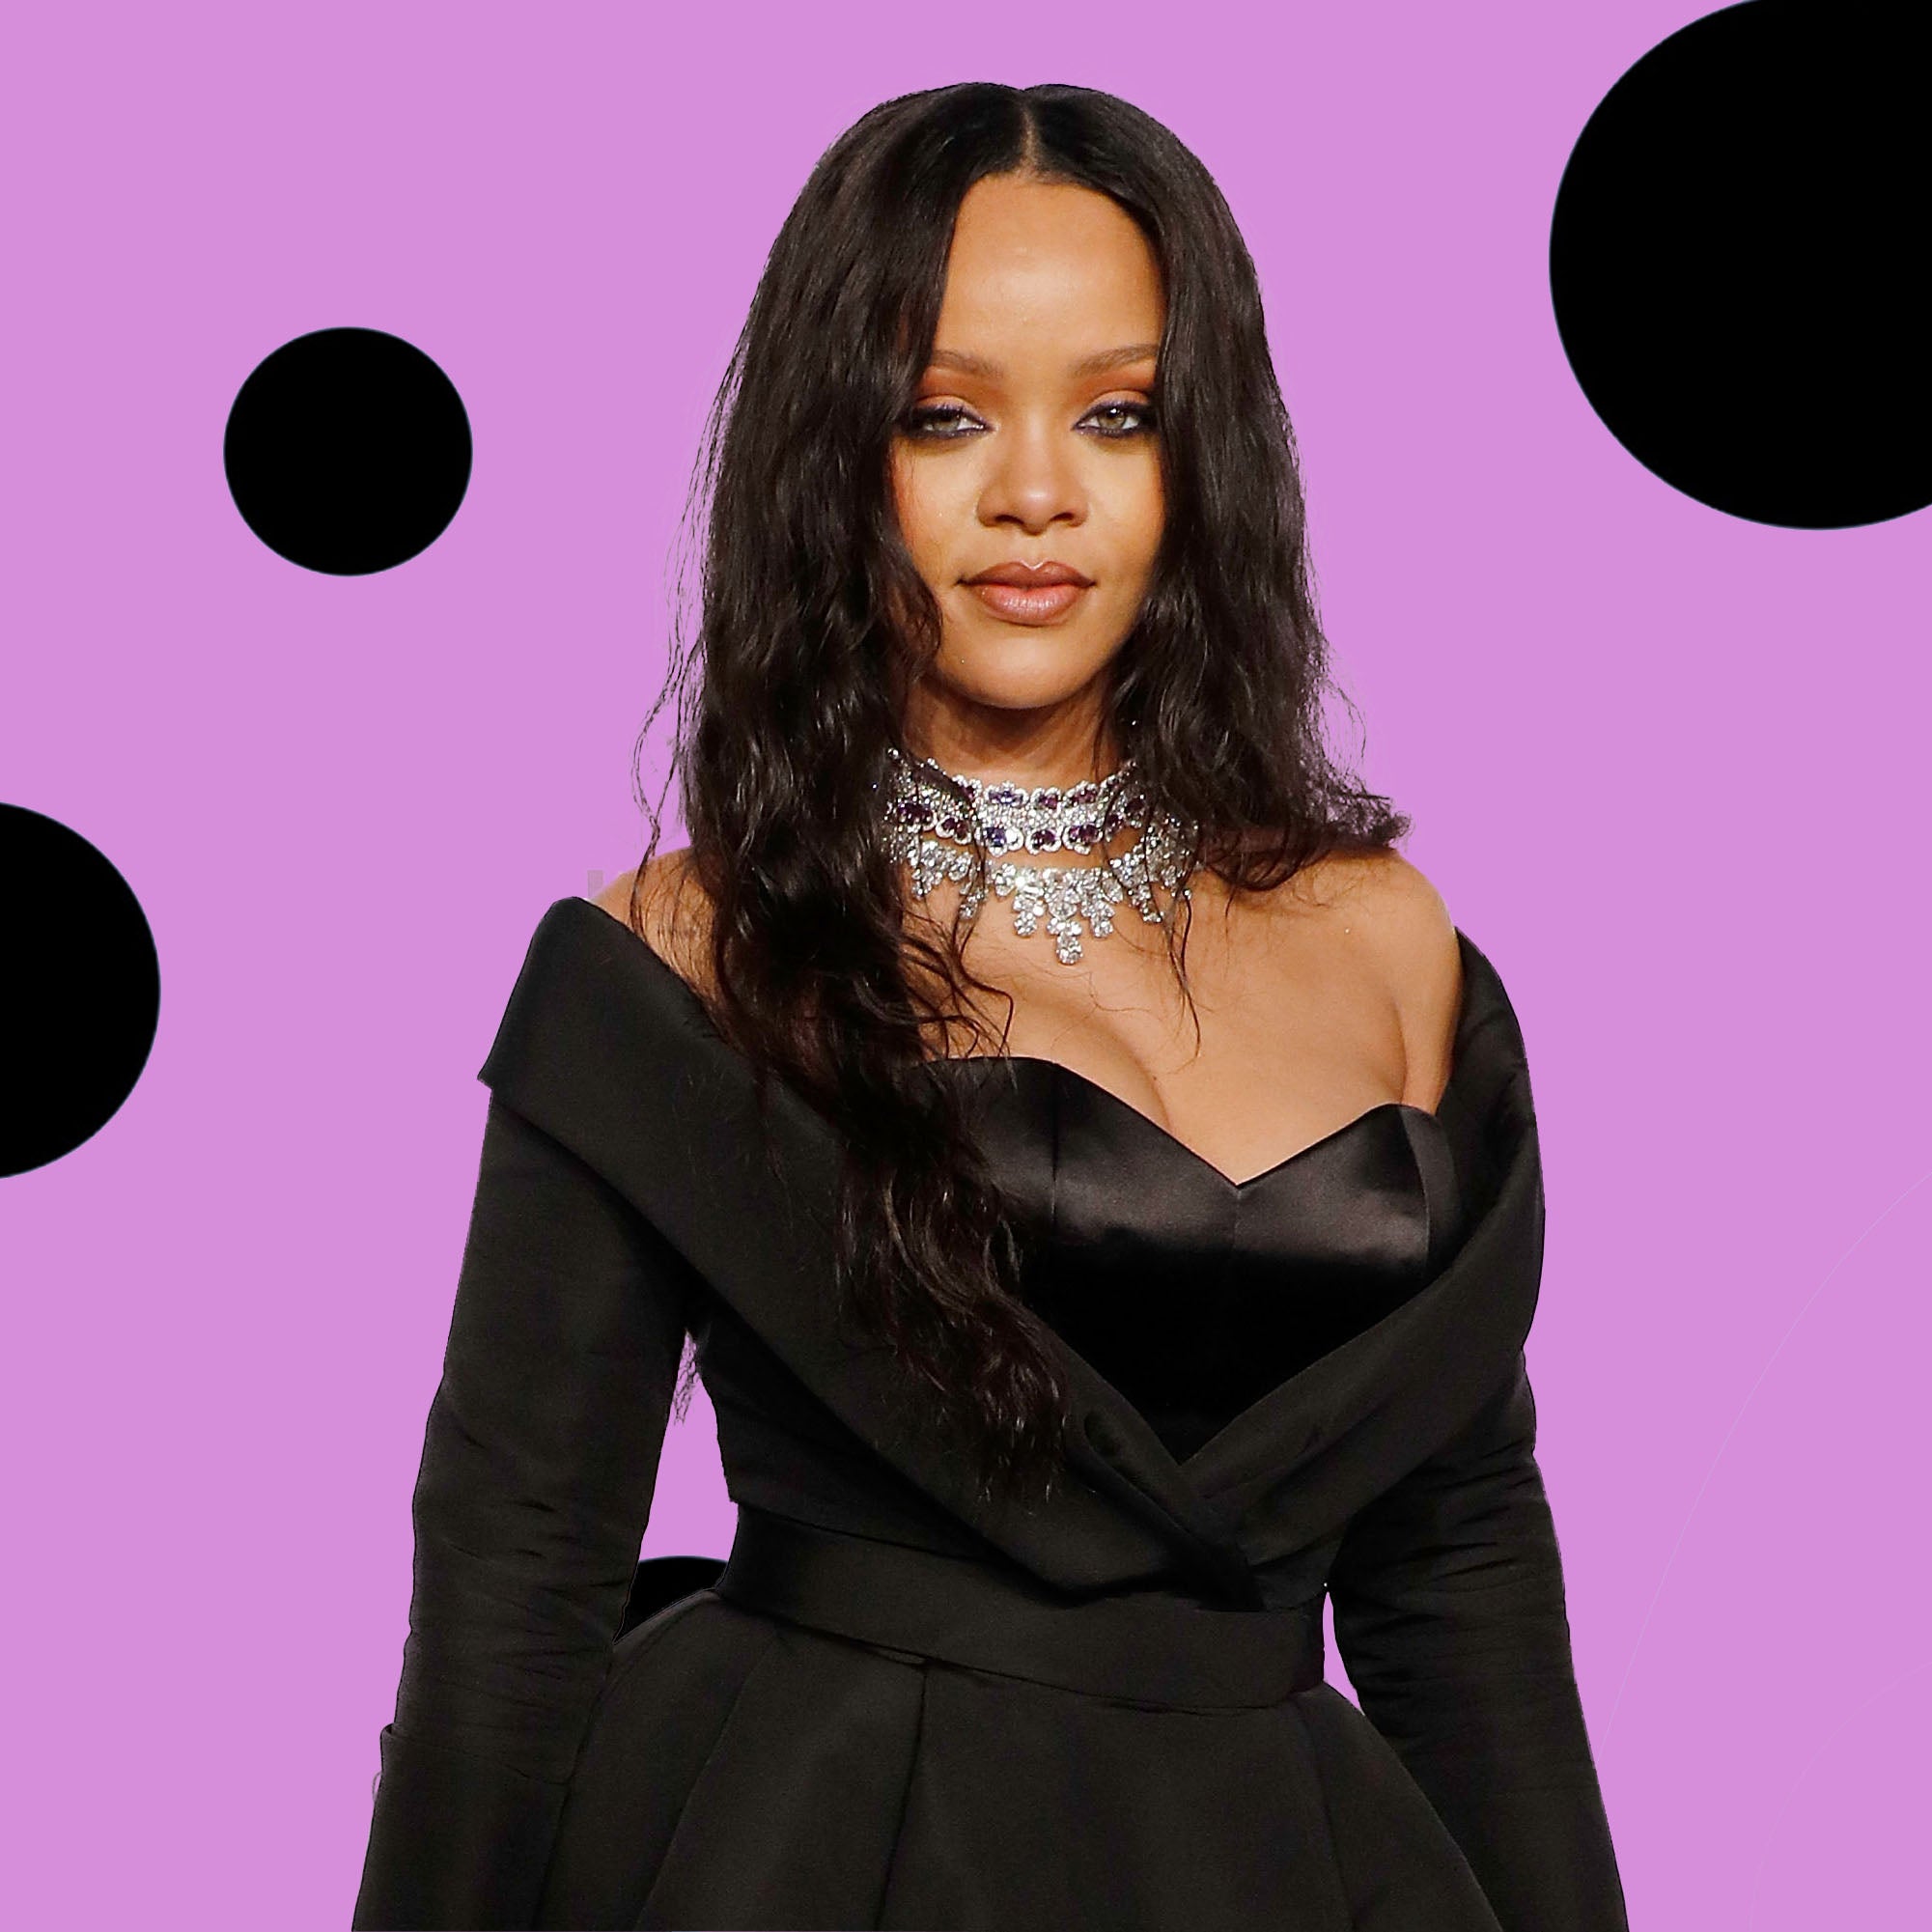 17 Times Rihanna Proved She's The Baddest Gal In 2017
